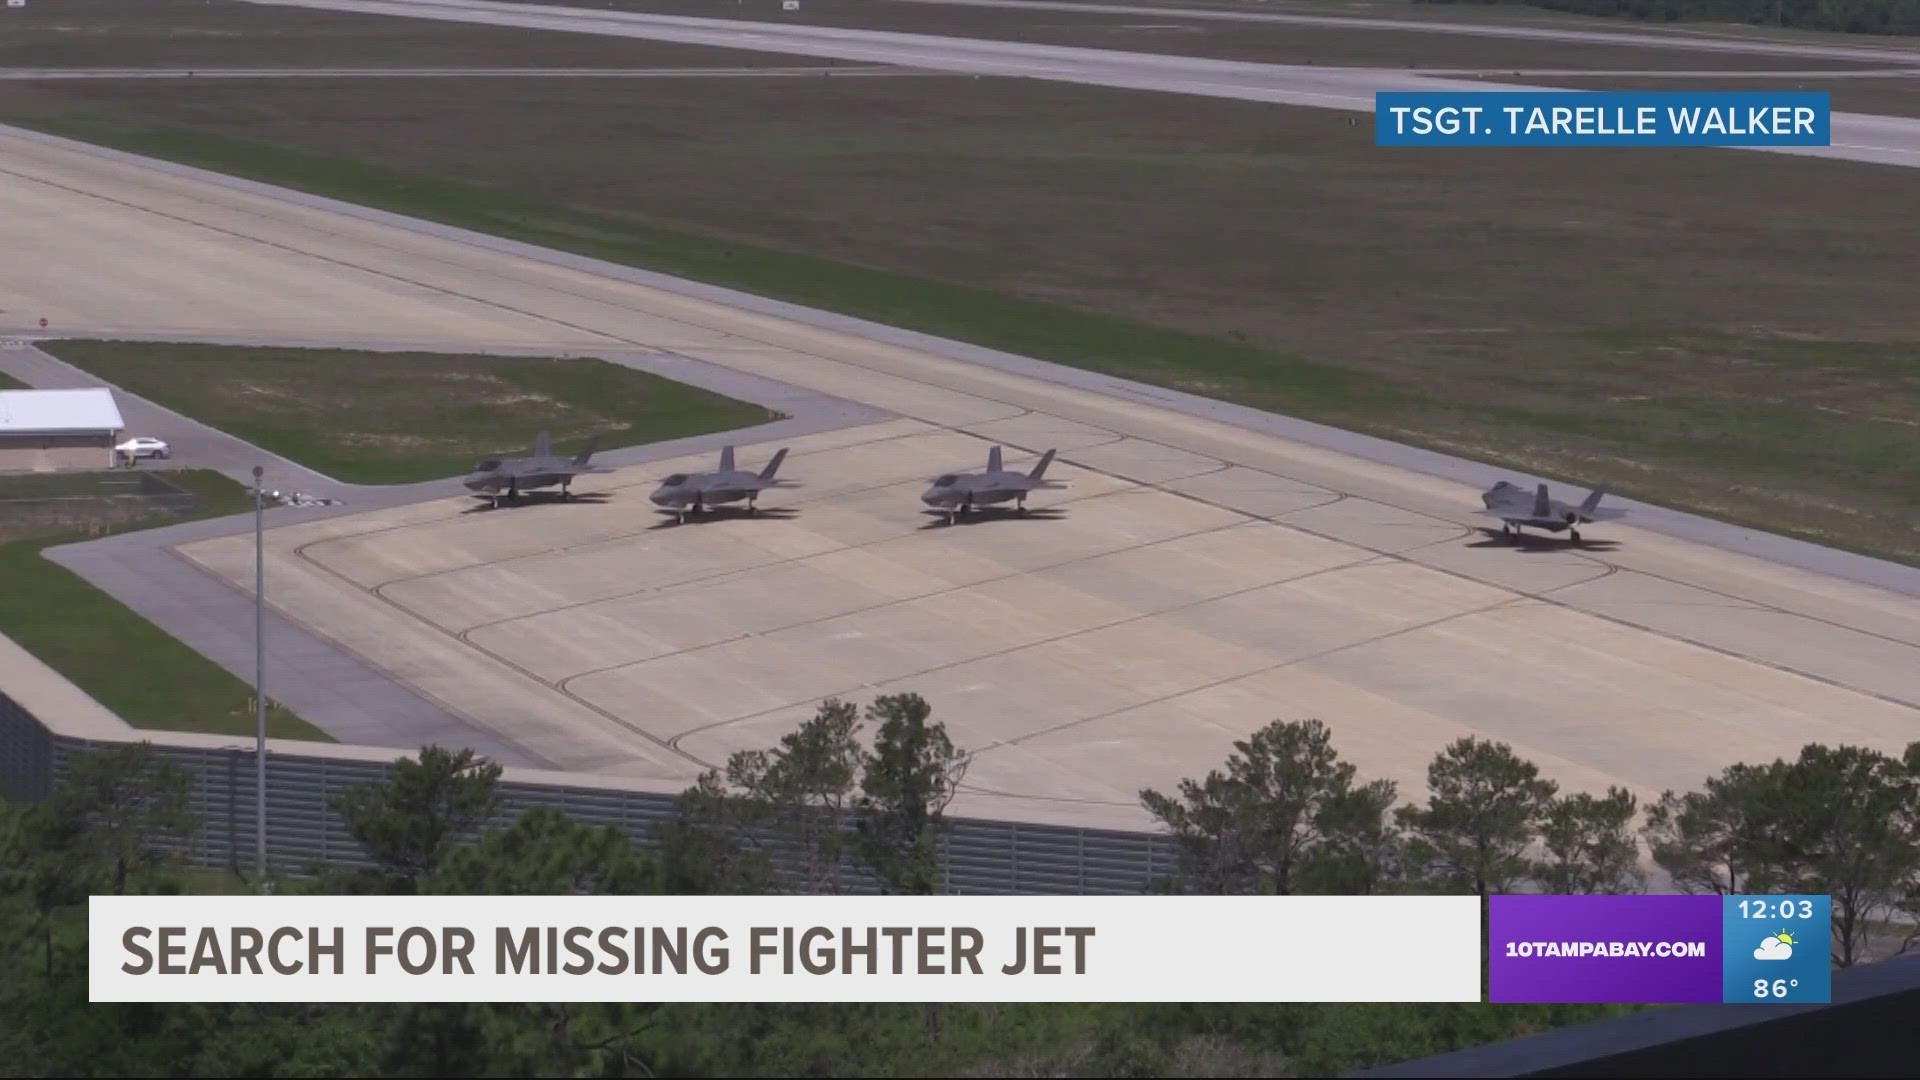 The pilot is safe, but the fighter jet with stealth abilities has gone missing after going down in South Carolina.